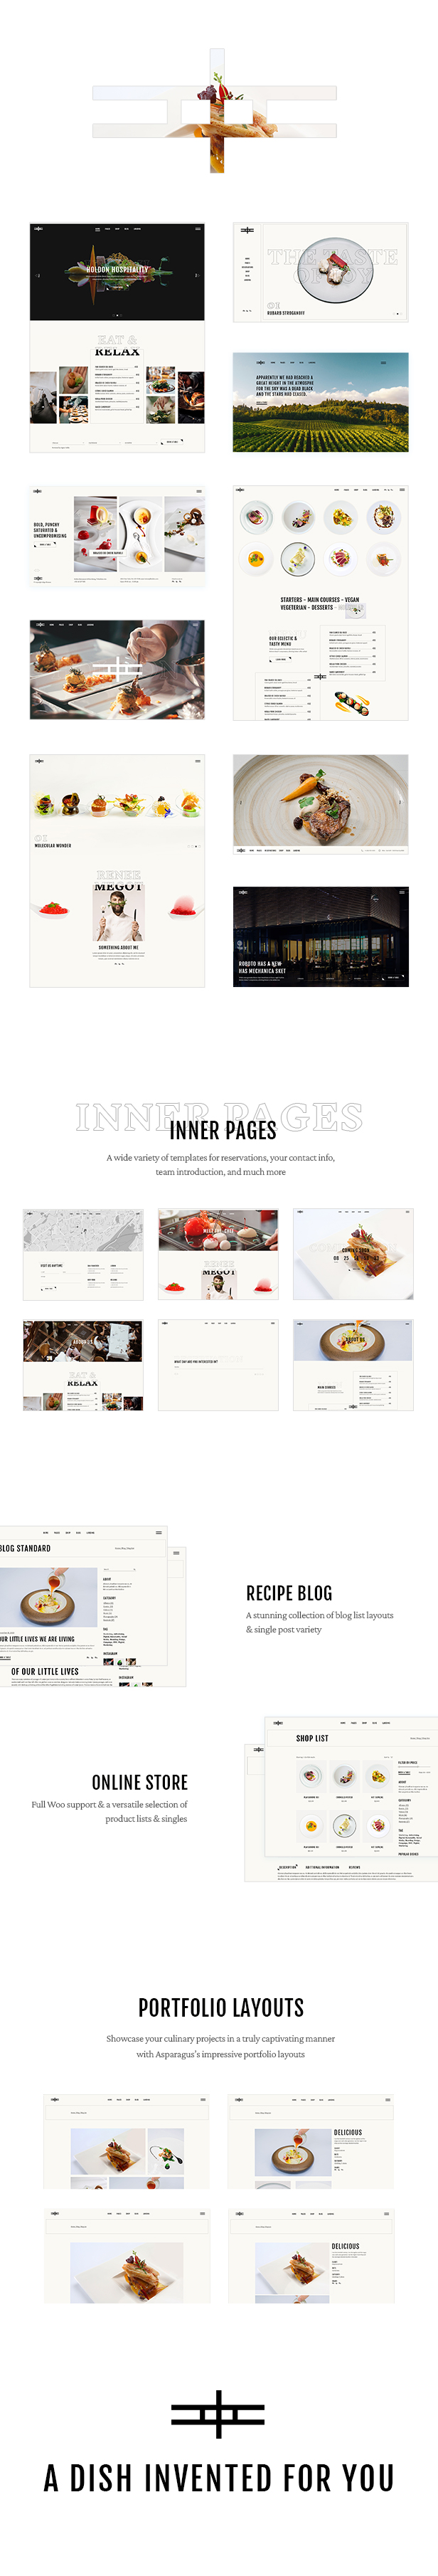 A selection of wonderful pages of the restaurant theme WordPress template.